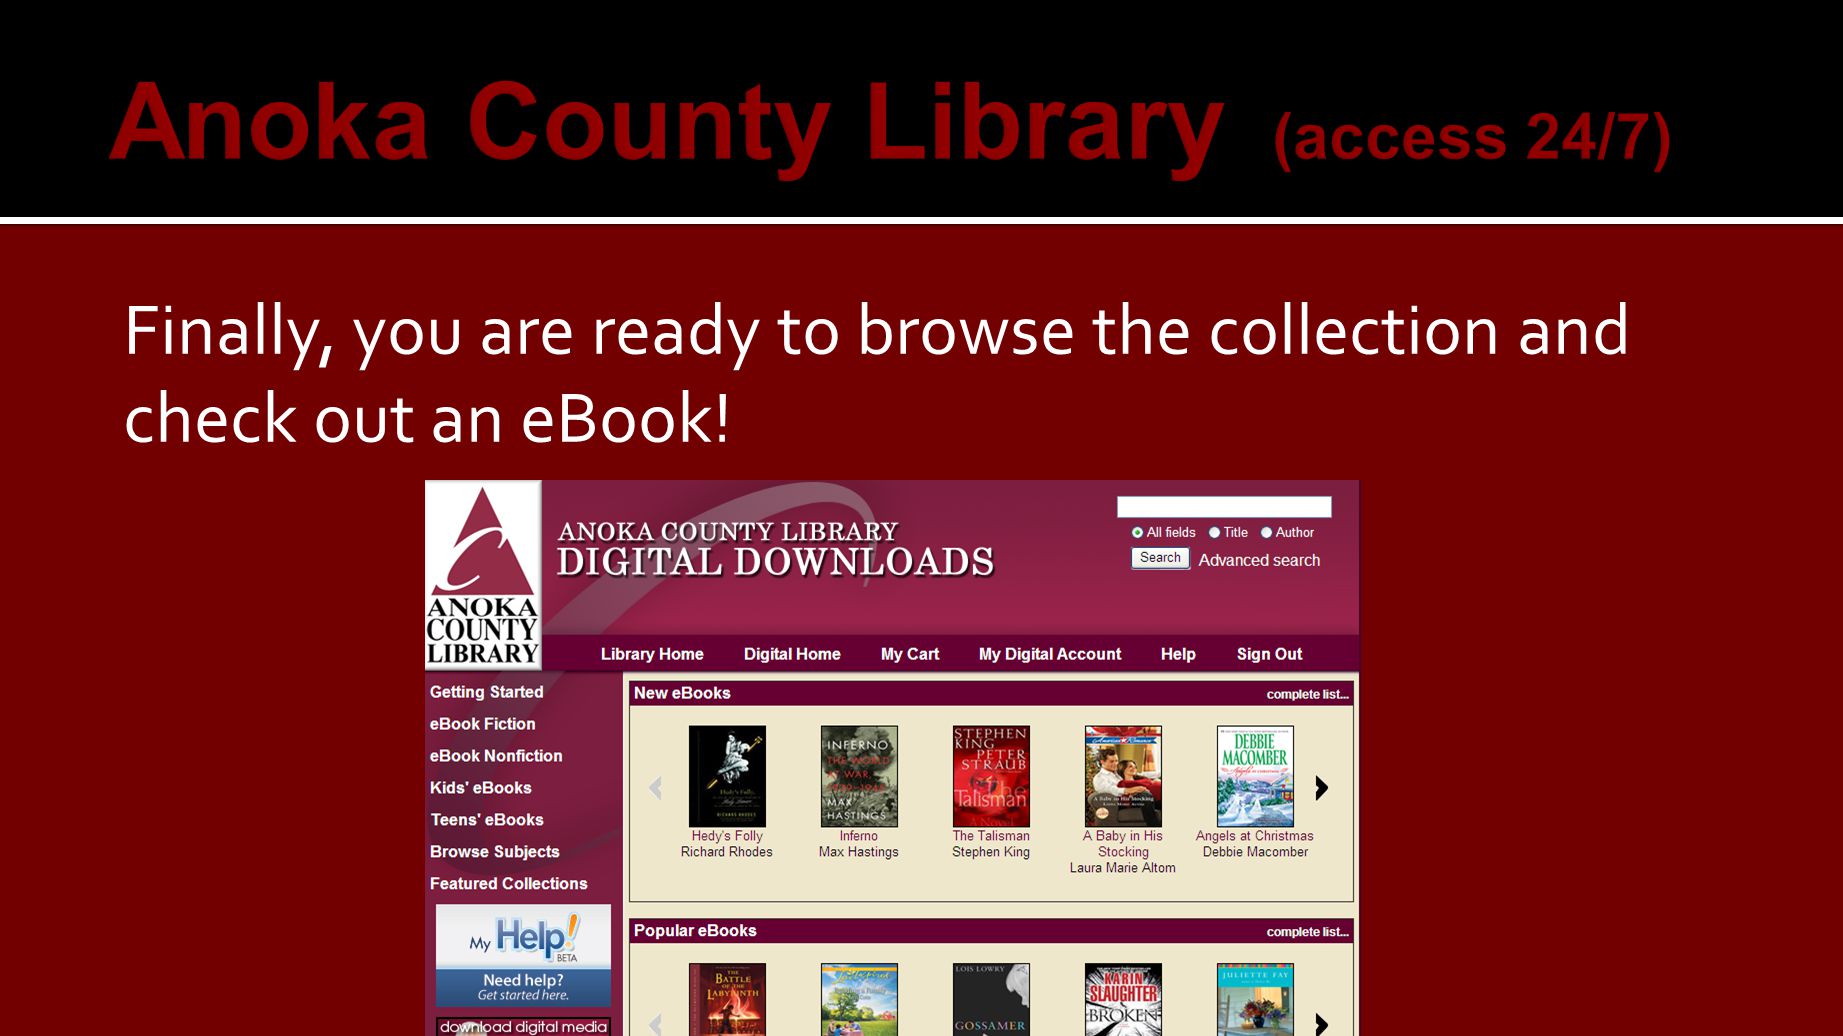 Finally, you are ready to browse the collection and check out an eBook!